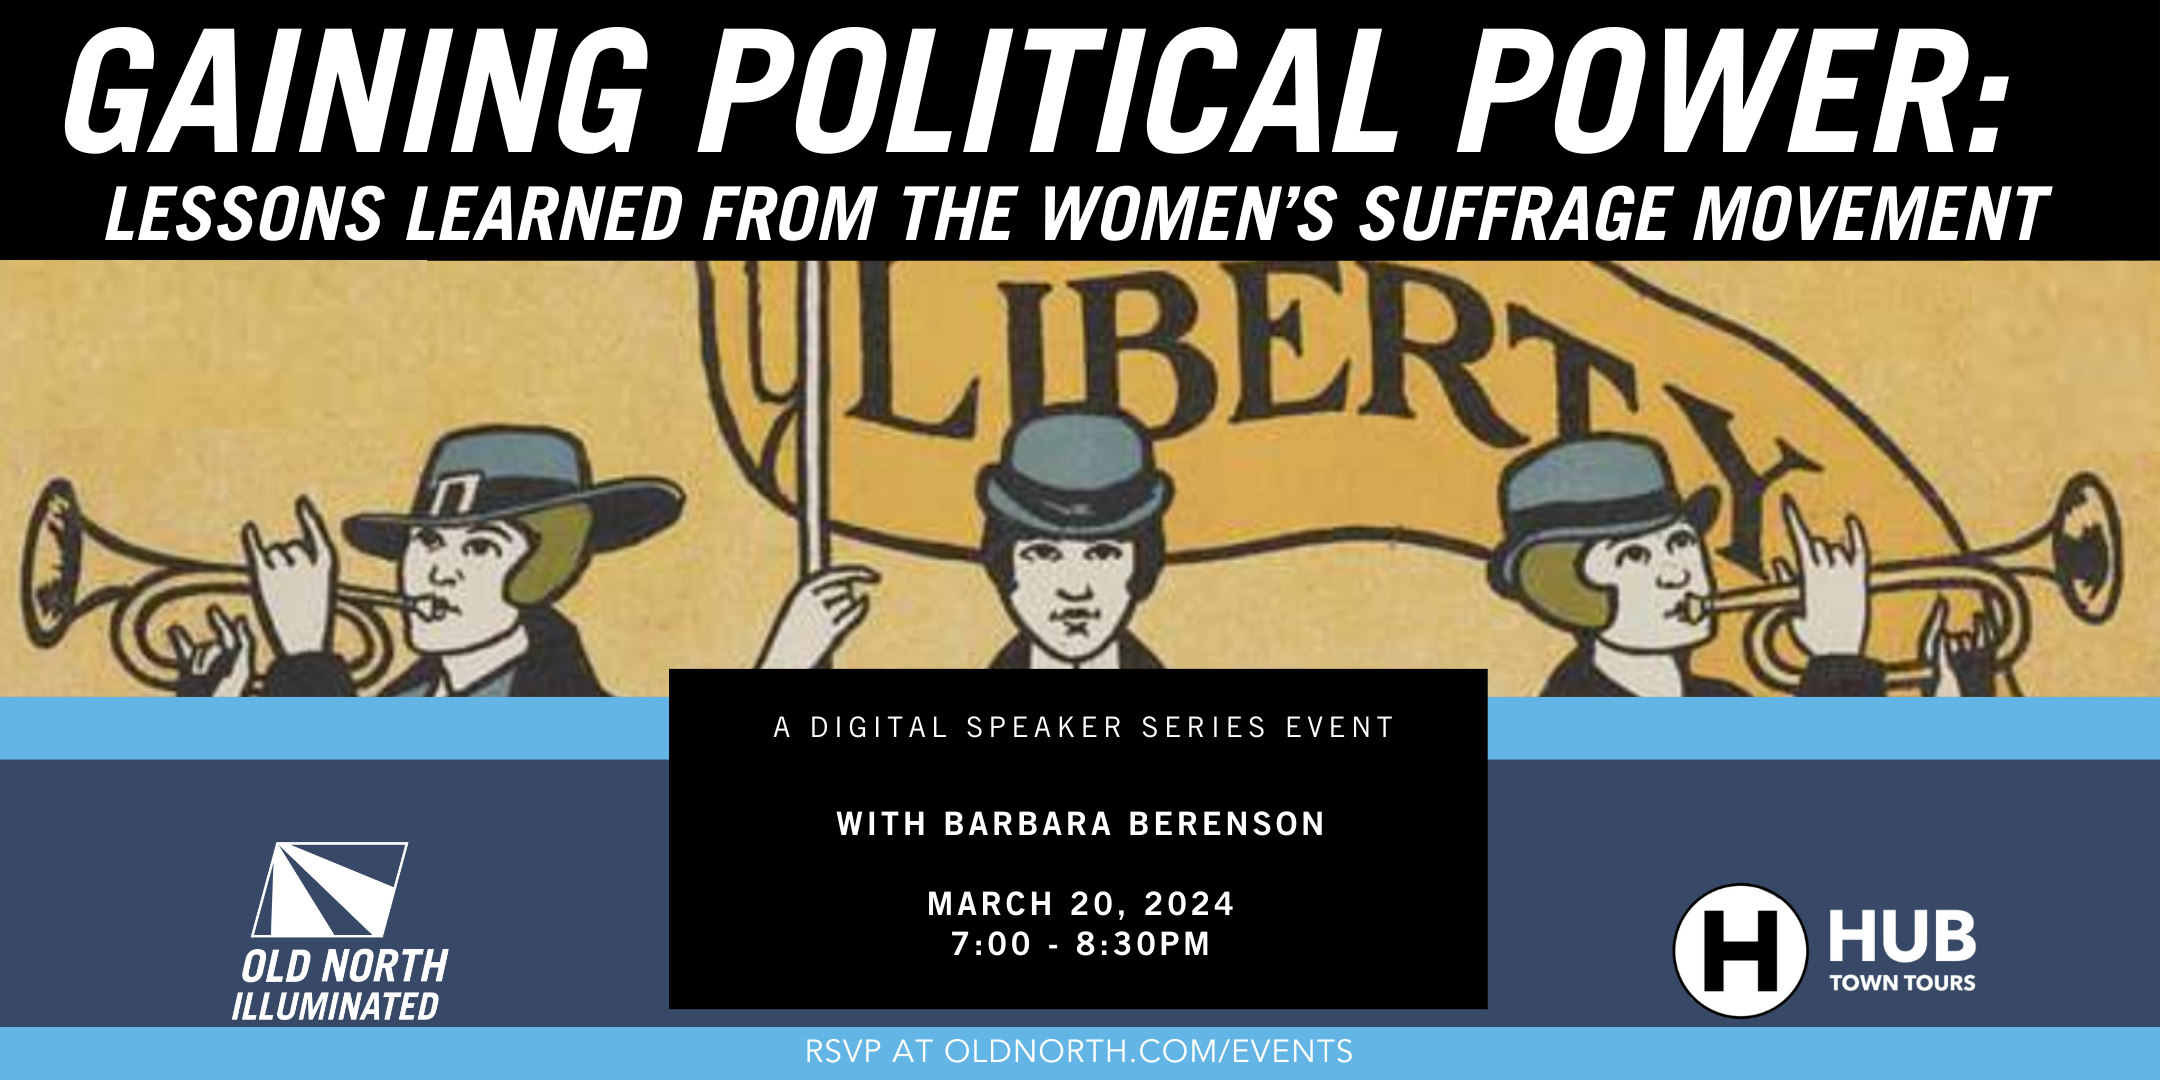 Gaining Political Power Lessons Learned from the Women's Suffrage Movement